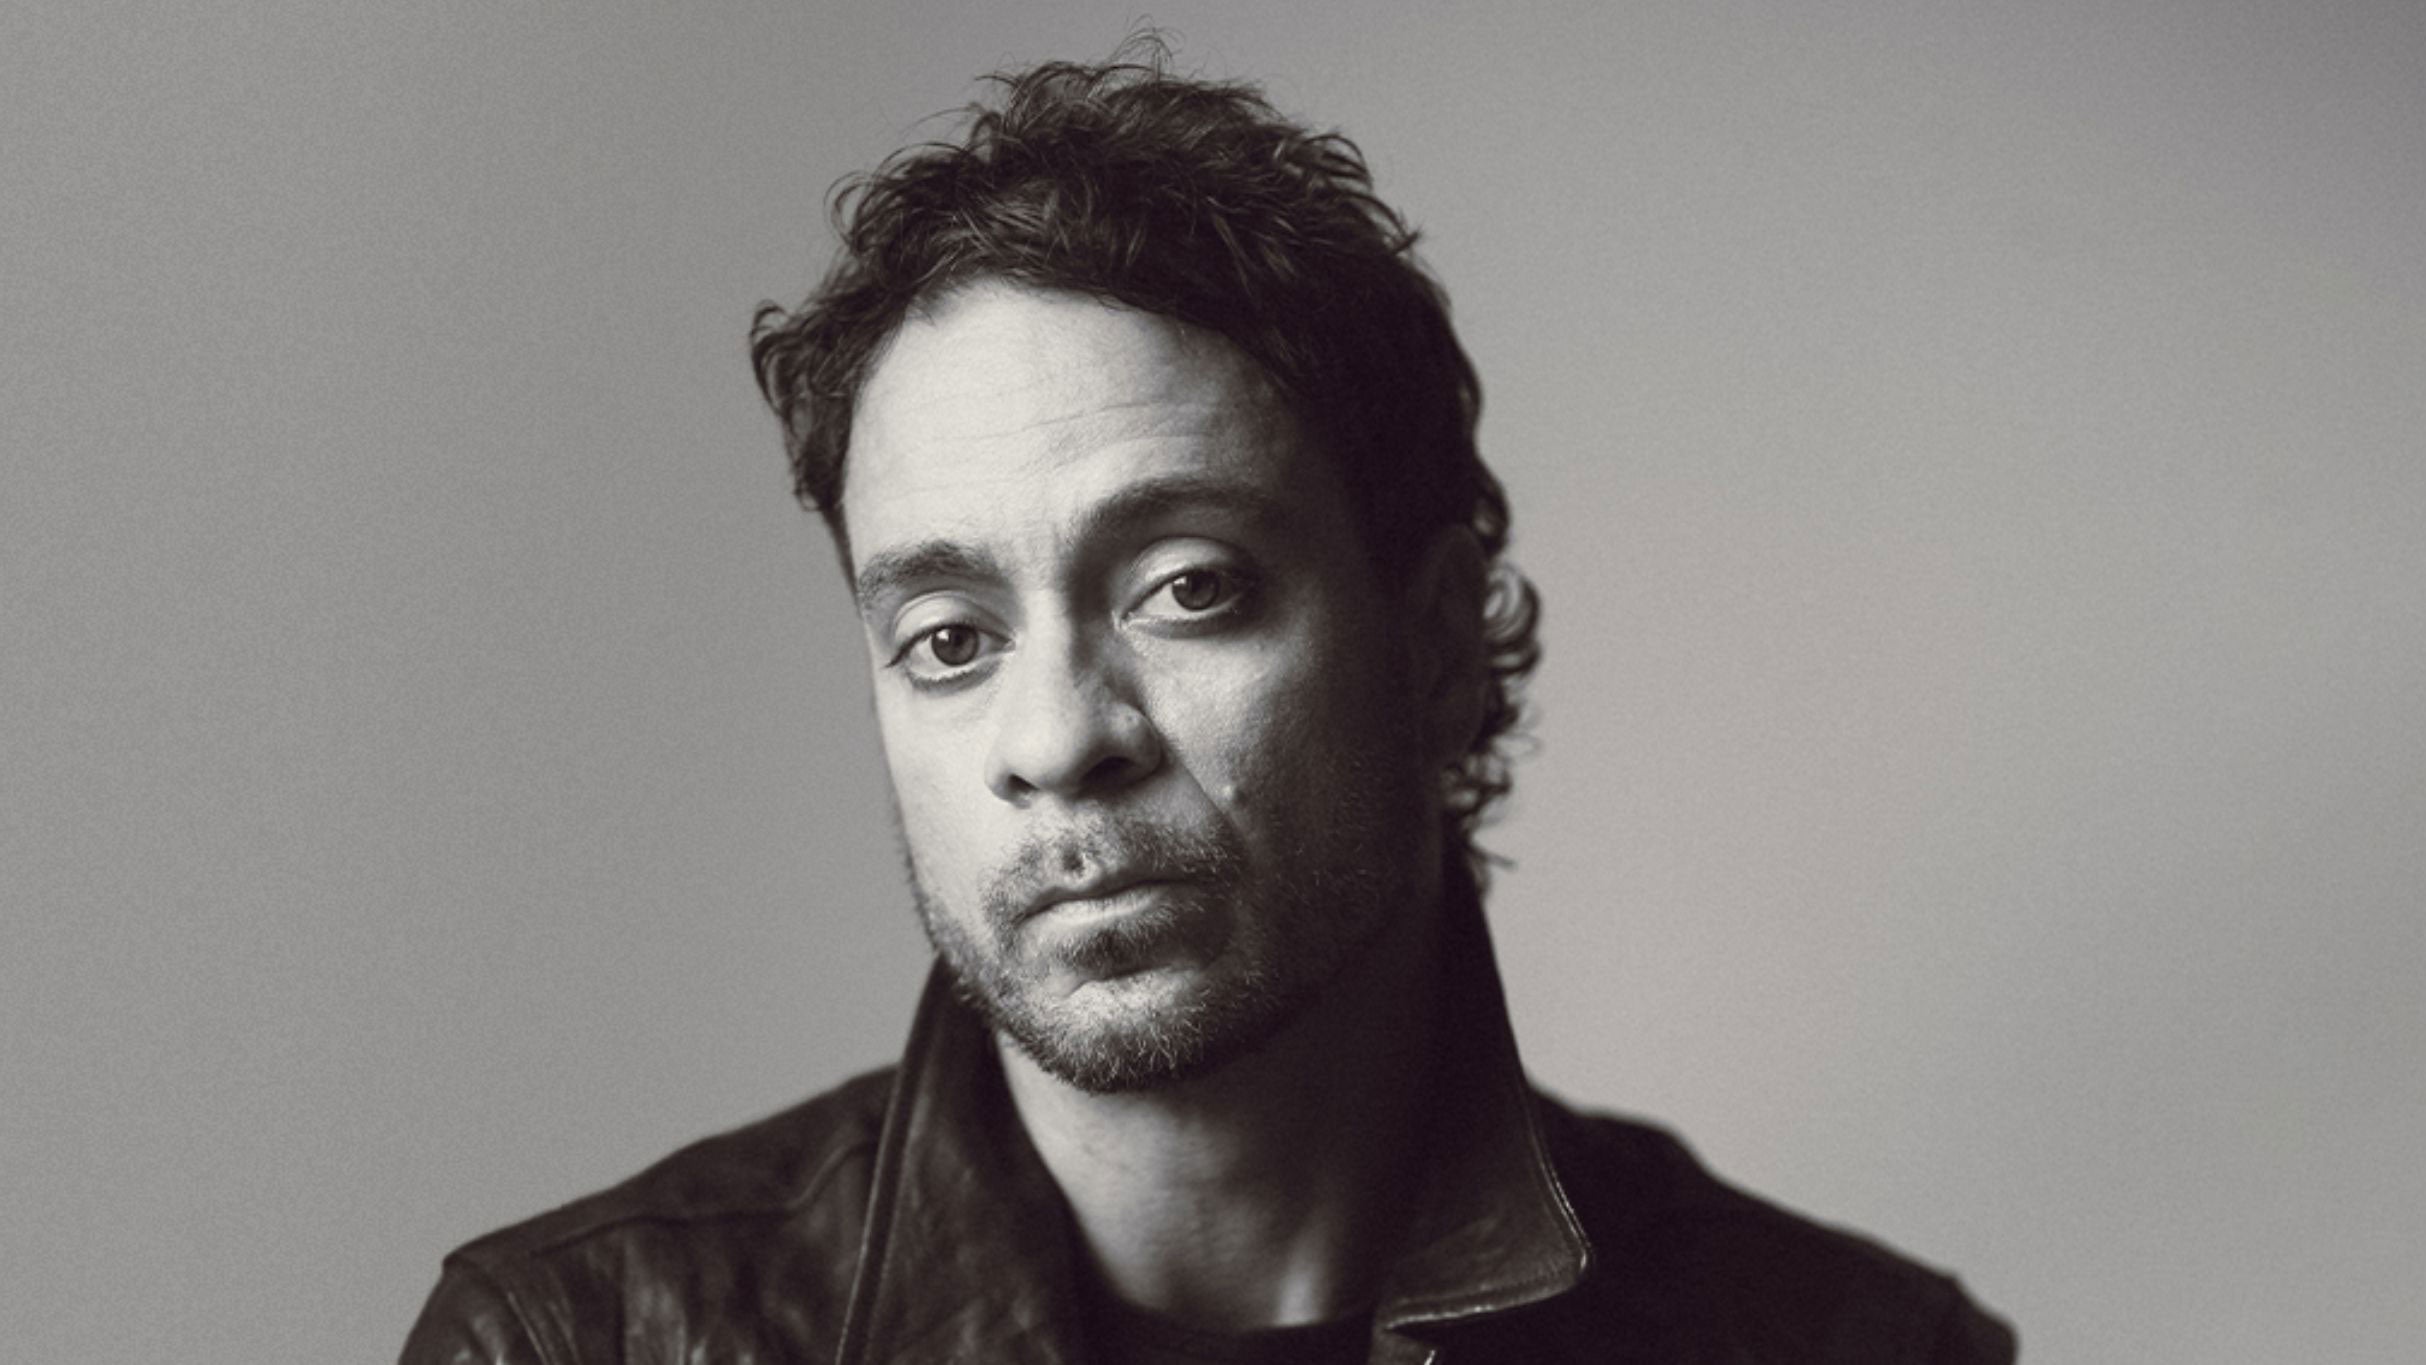 Amos Lee & Indigo Girls free presale pasword for early tickets in Los Angeles